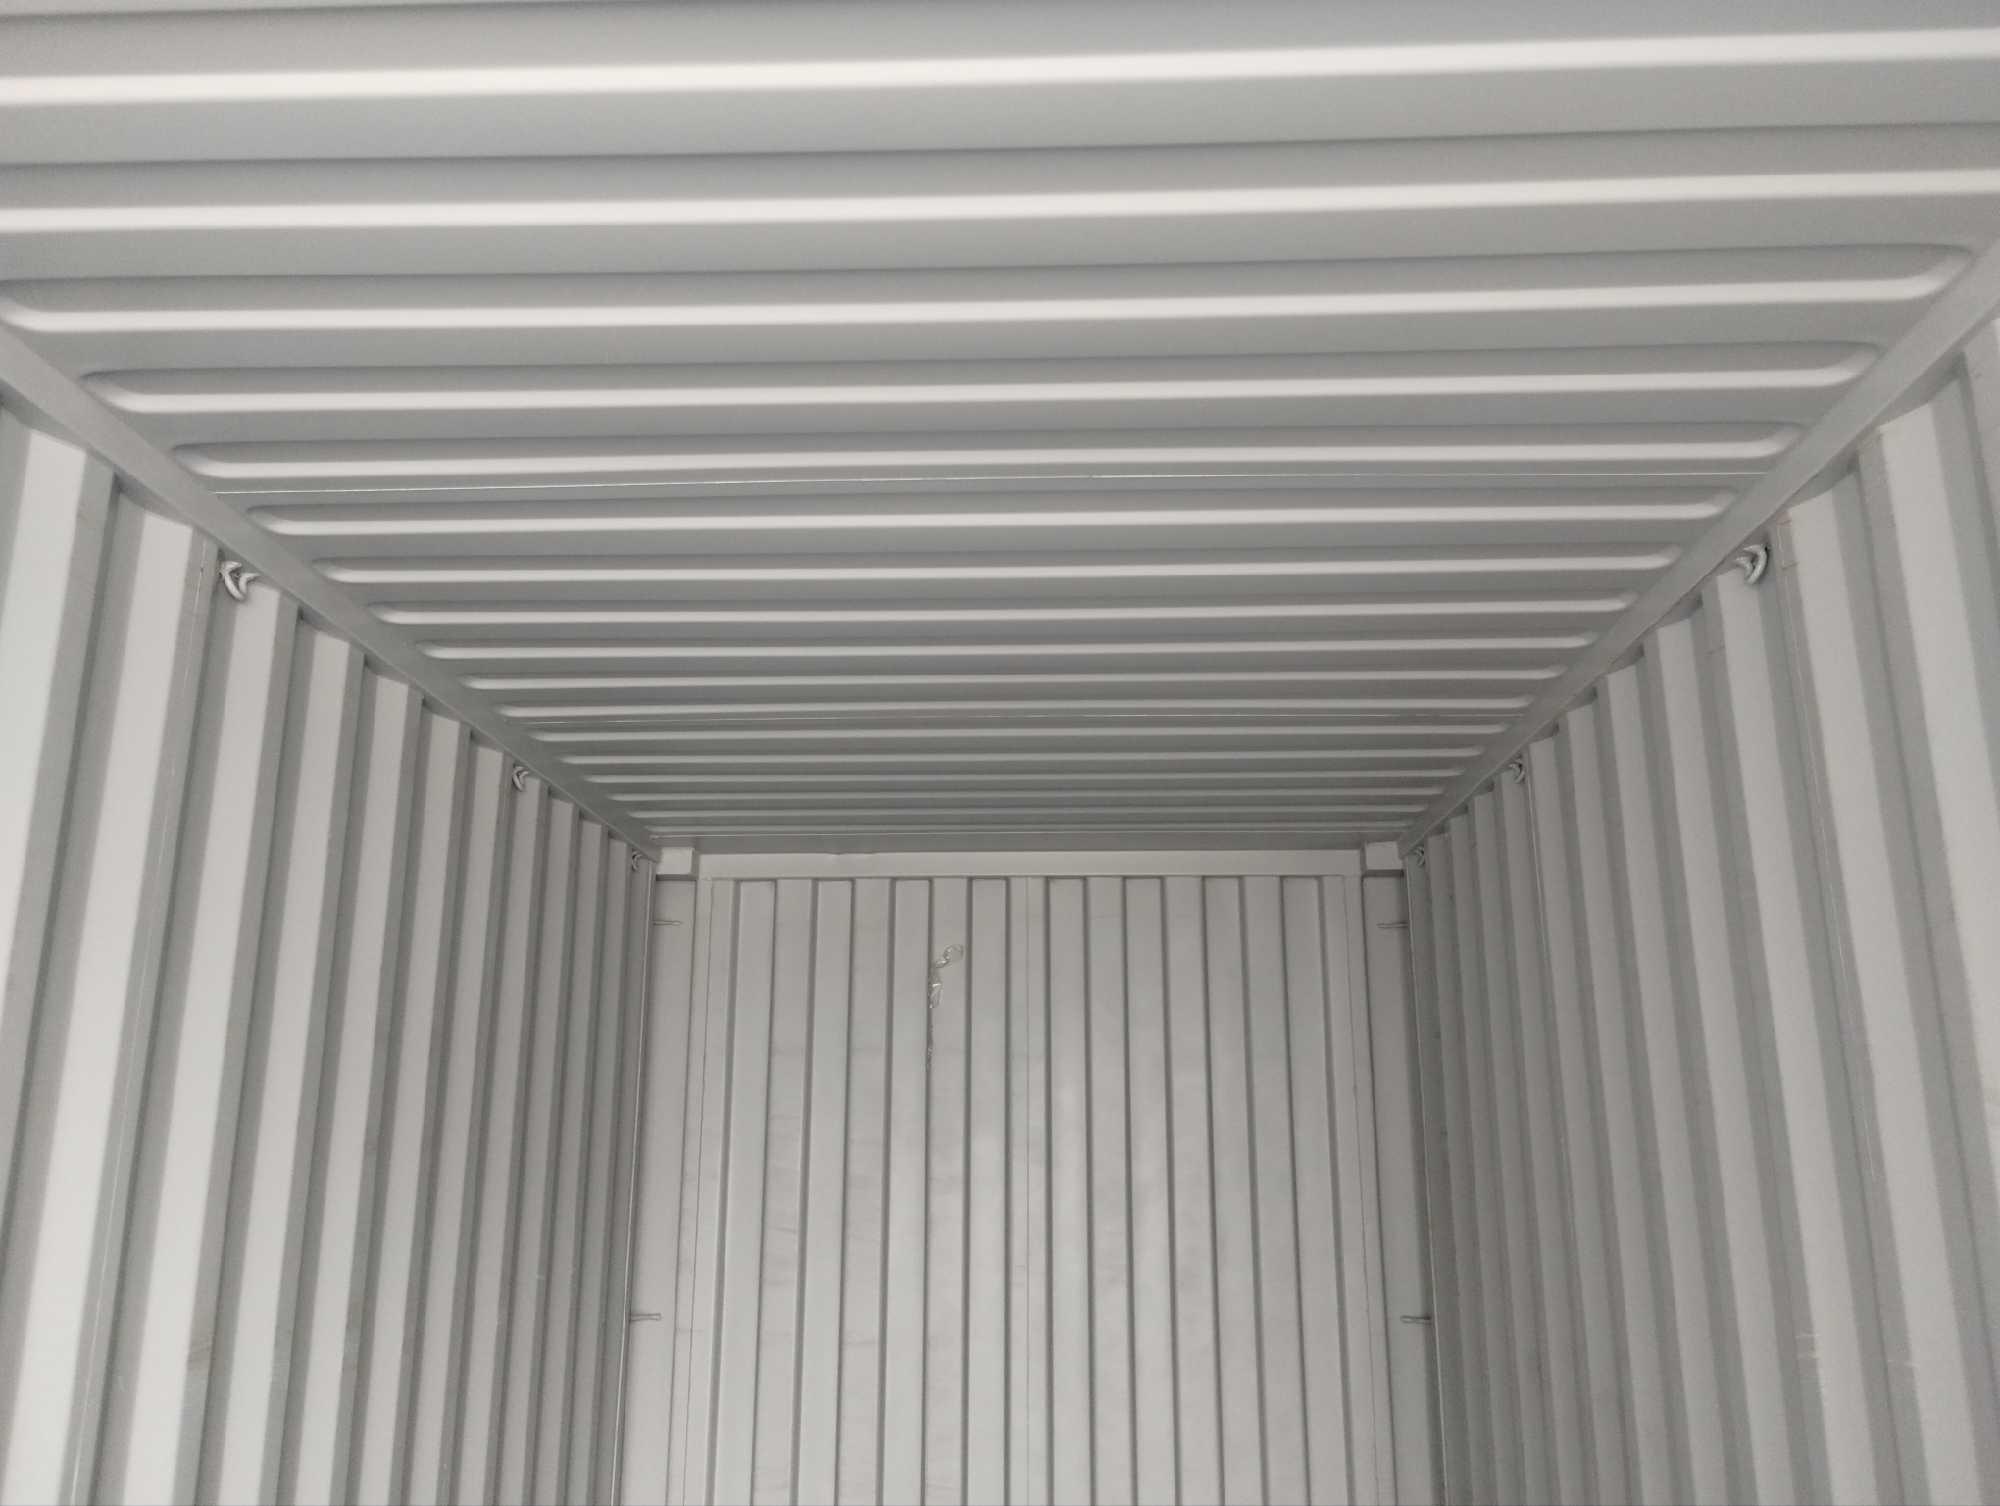 20 Feet Container